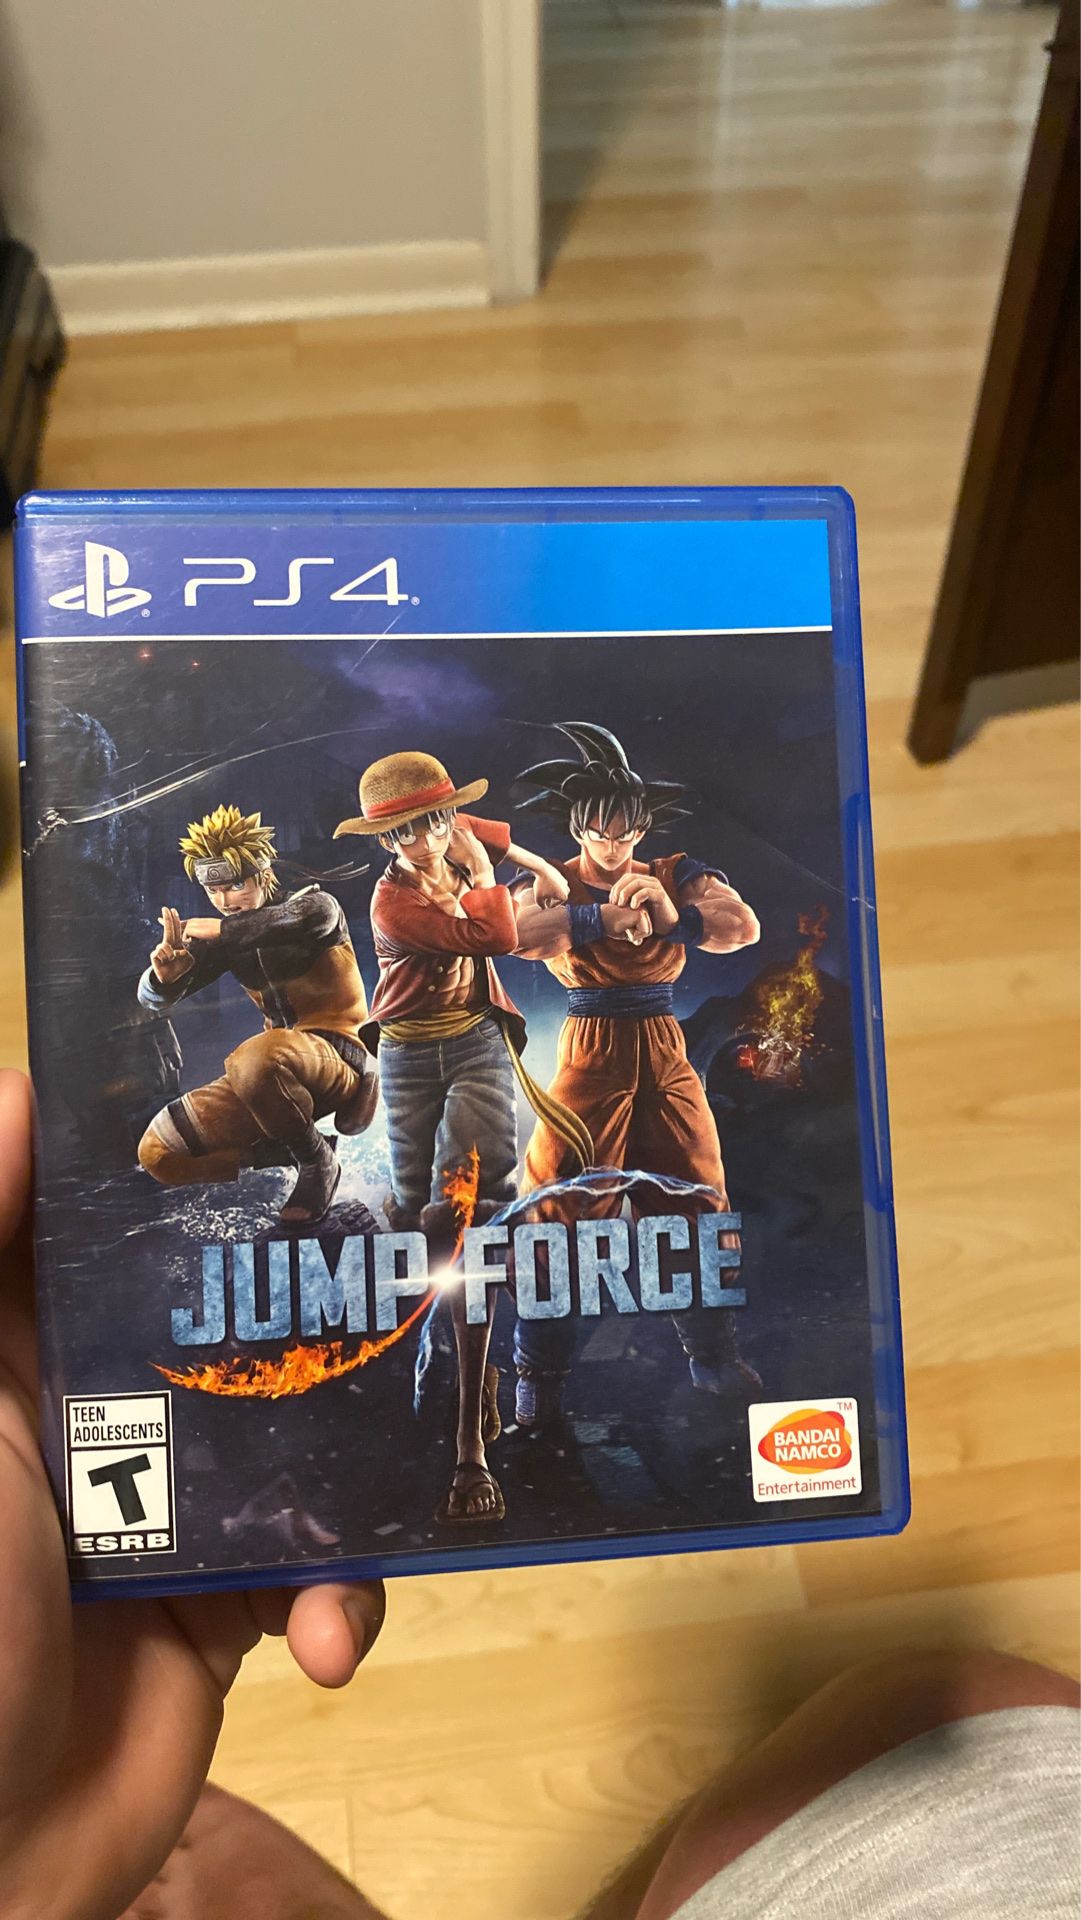 Jump force PS4